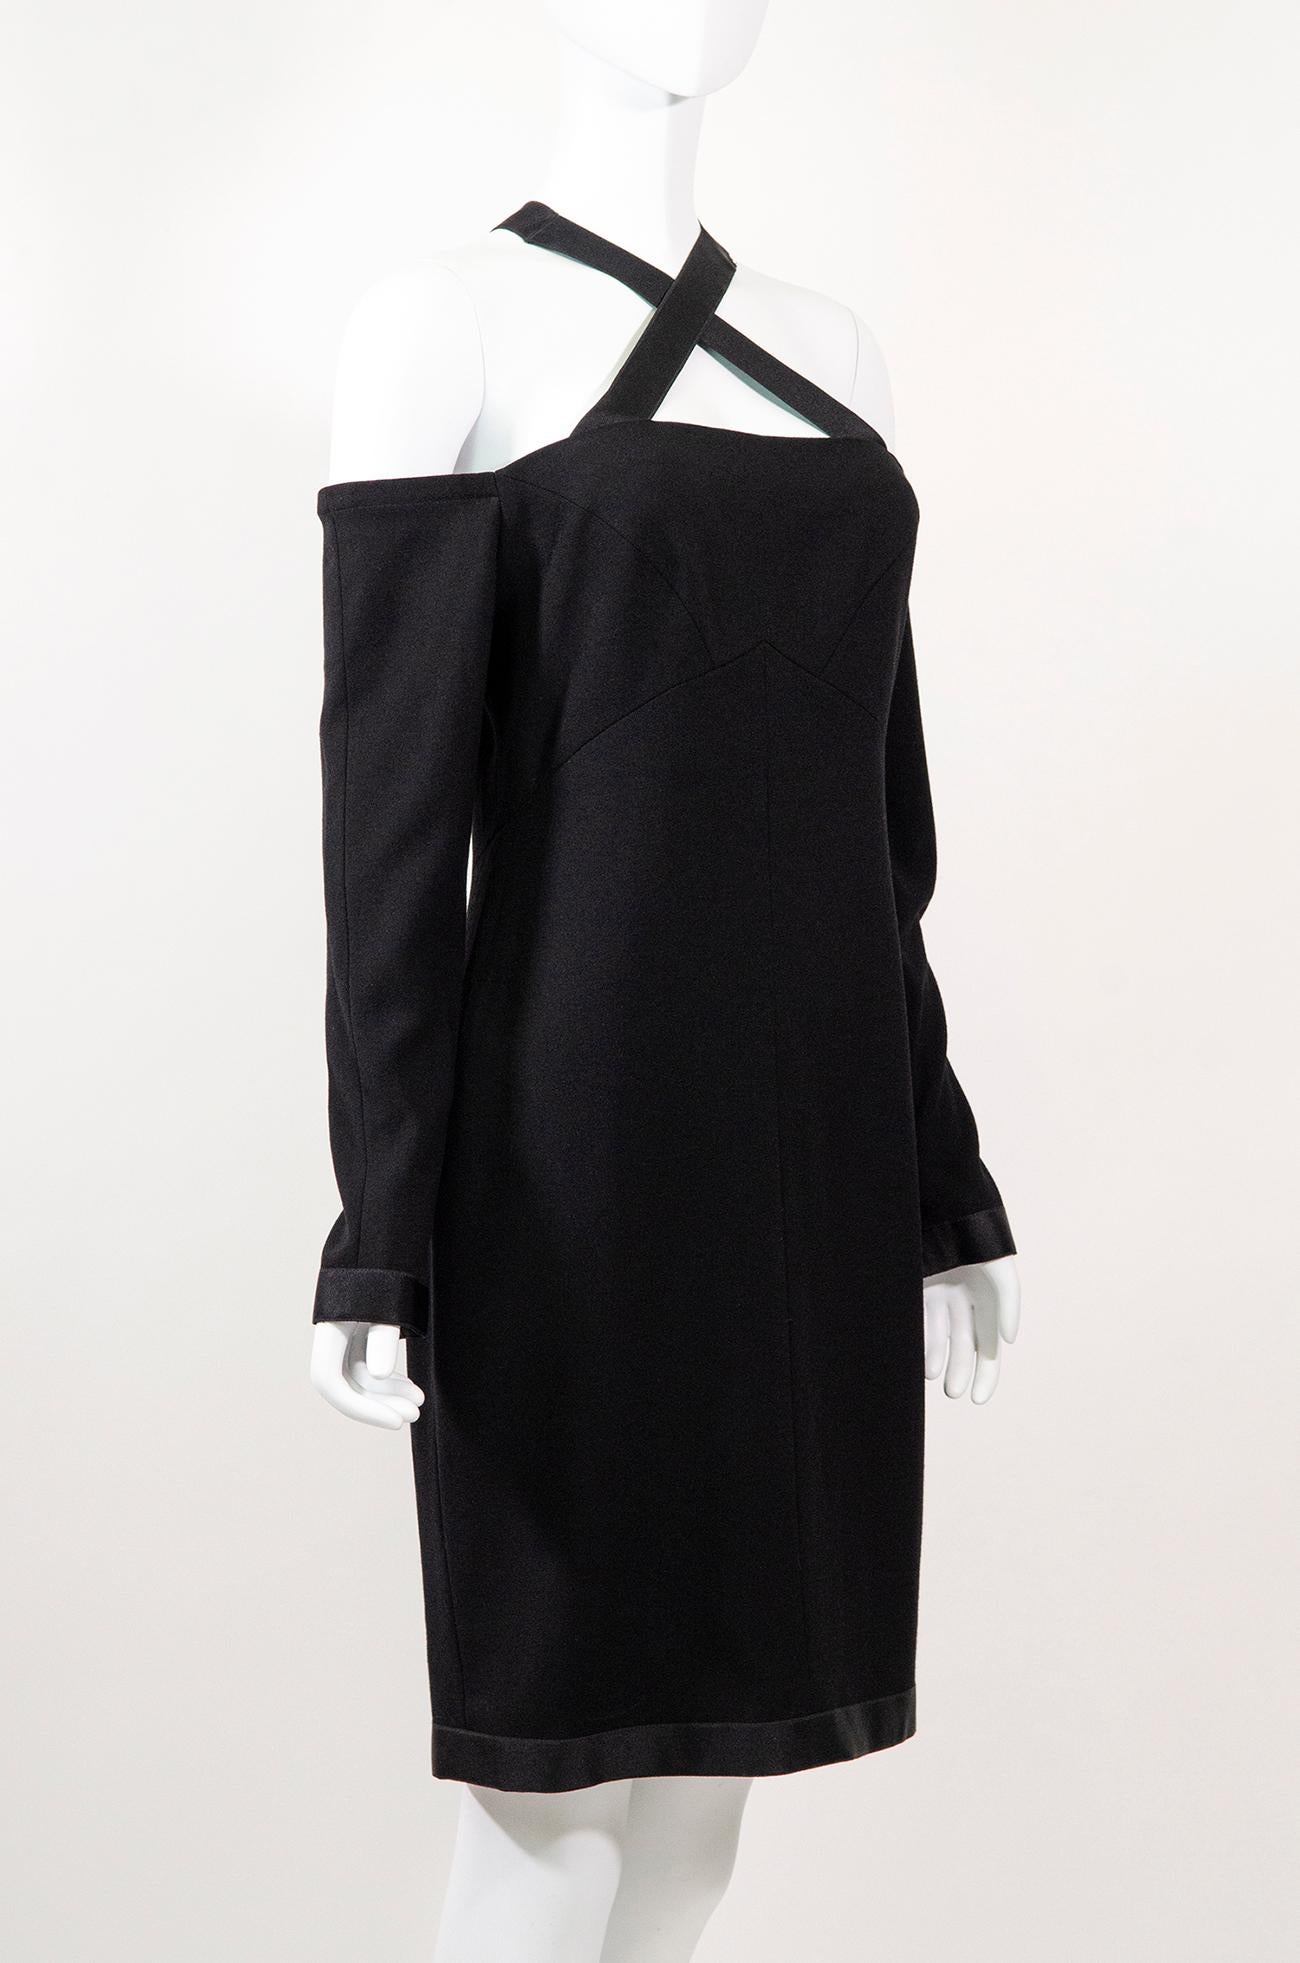 The perfect little black vintage dress by Chanel. This classic beauty is a 1990s piece designed by Karl Lagerfeld.

This elegant Chanel dress is an incredible classic that will truly never go out of style. The quality is outstanding - made from wool